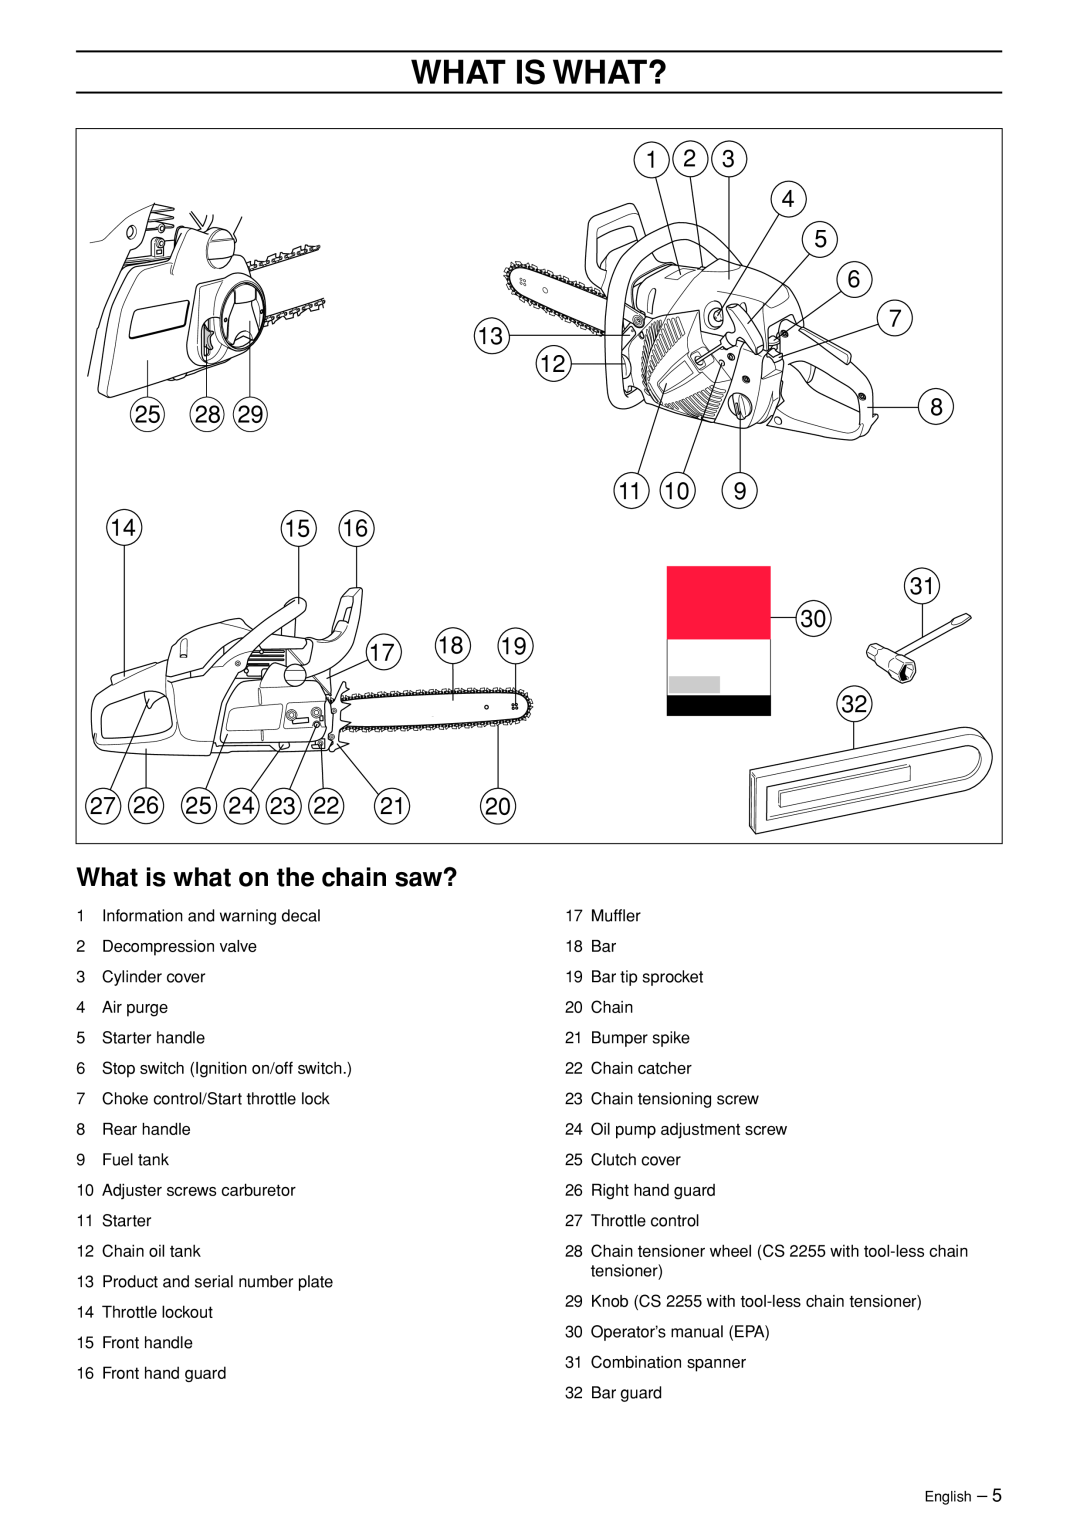 Jonsered CS 2255 manual What Is What?, What is what on the chain saw? 